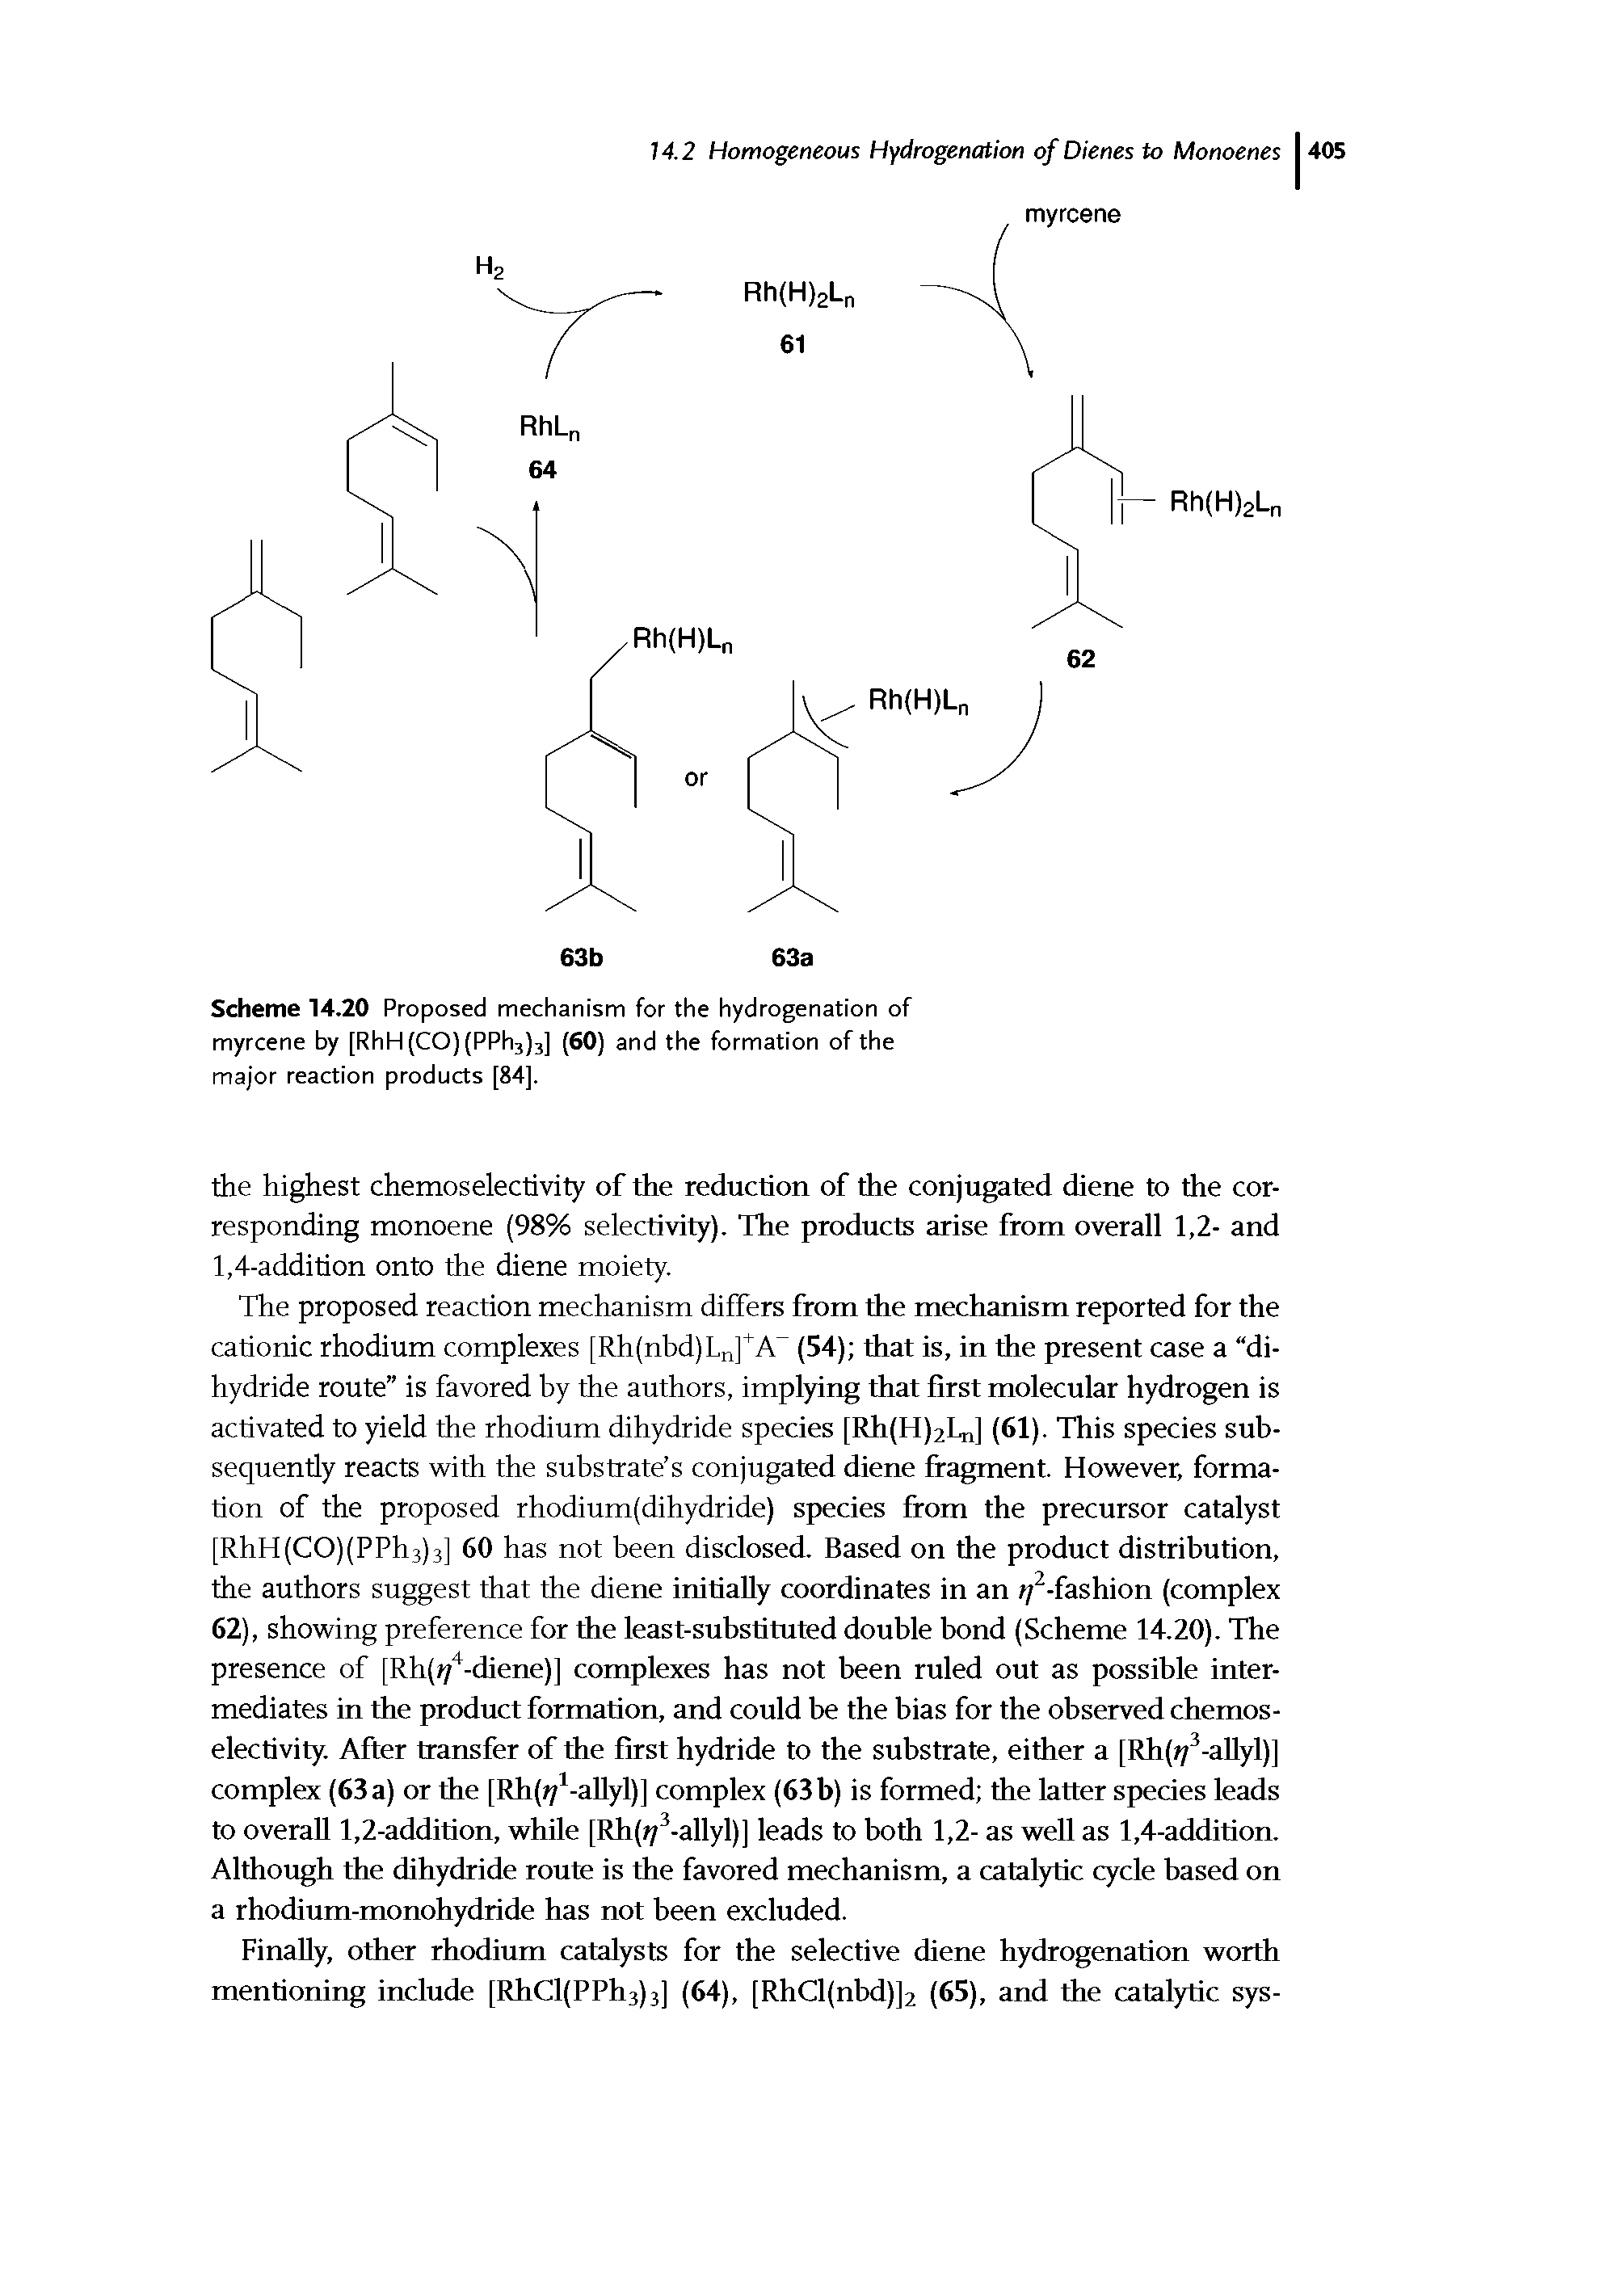 Scheme 14.20 Proposed mechanism for the hydrogenation of myrcene by [RhH (CO) (PPh3)3] (60) and the formation of the major reaction products [84].